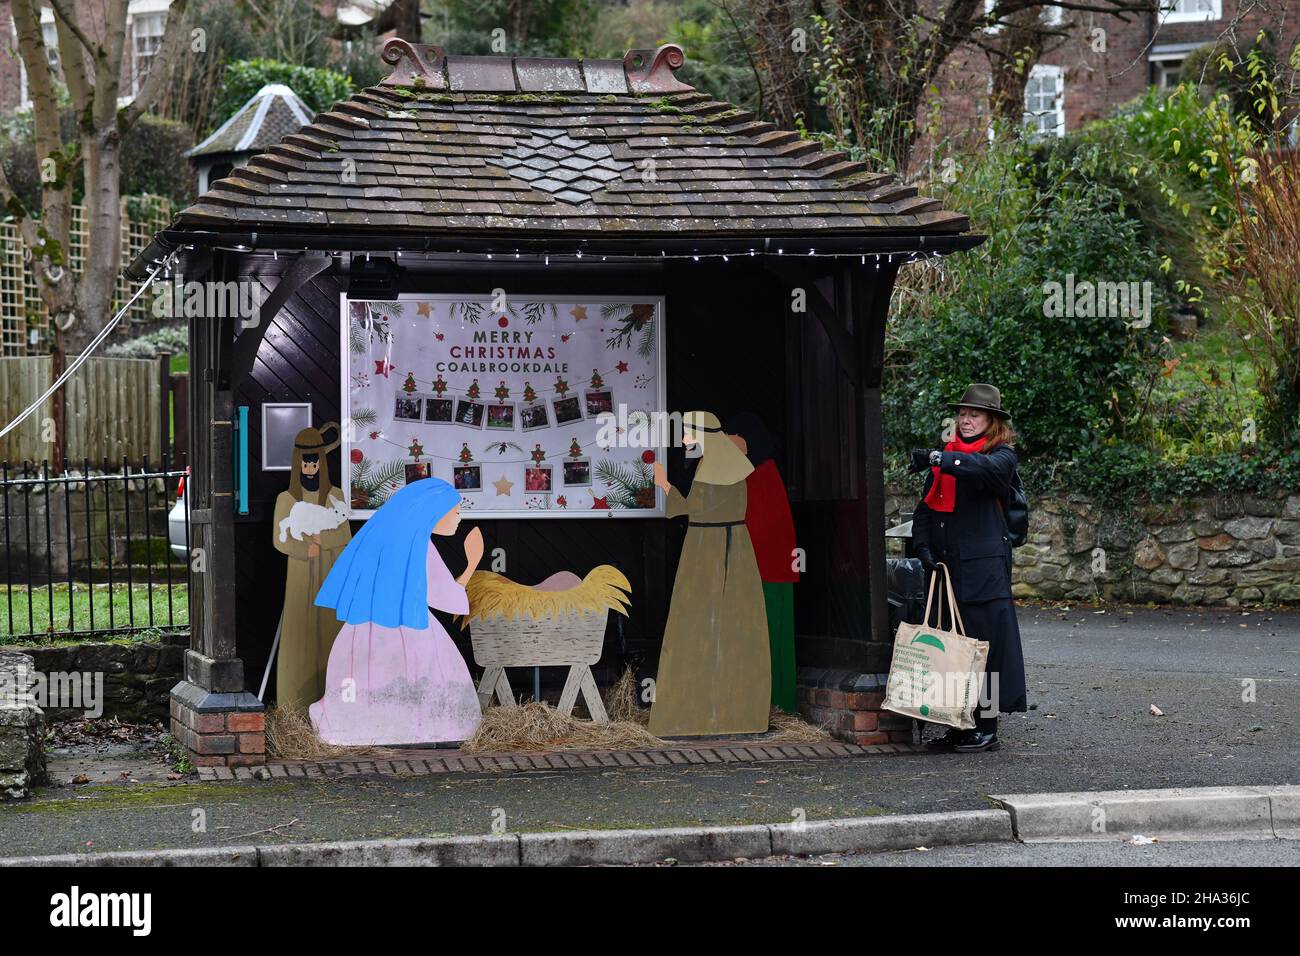 Shropshire, UK. 10th Dec, 2021. Coalbrookdale, Shropshire, Uk December 10th 2021. No room at the shelter! A commuter waiting at the village bus stop in Coalbrookdale, Shropshire stands outside the bus shelter as it is now locating the school Christmas Nativity Scene. Credit: David Bagnall/Alamy Live News Stock Photo